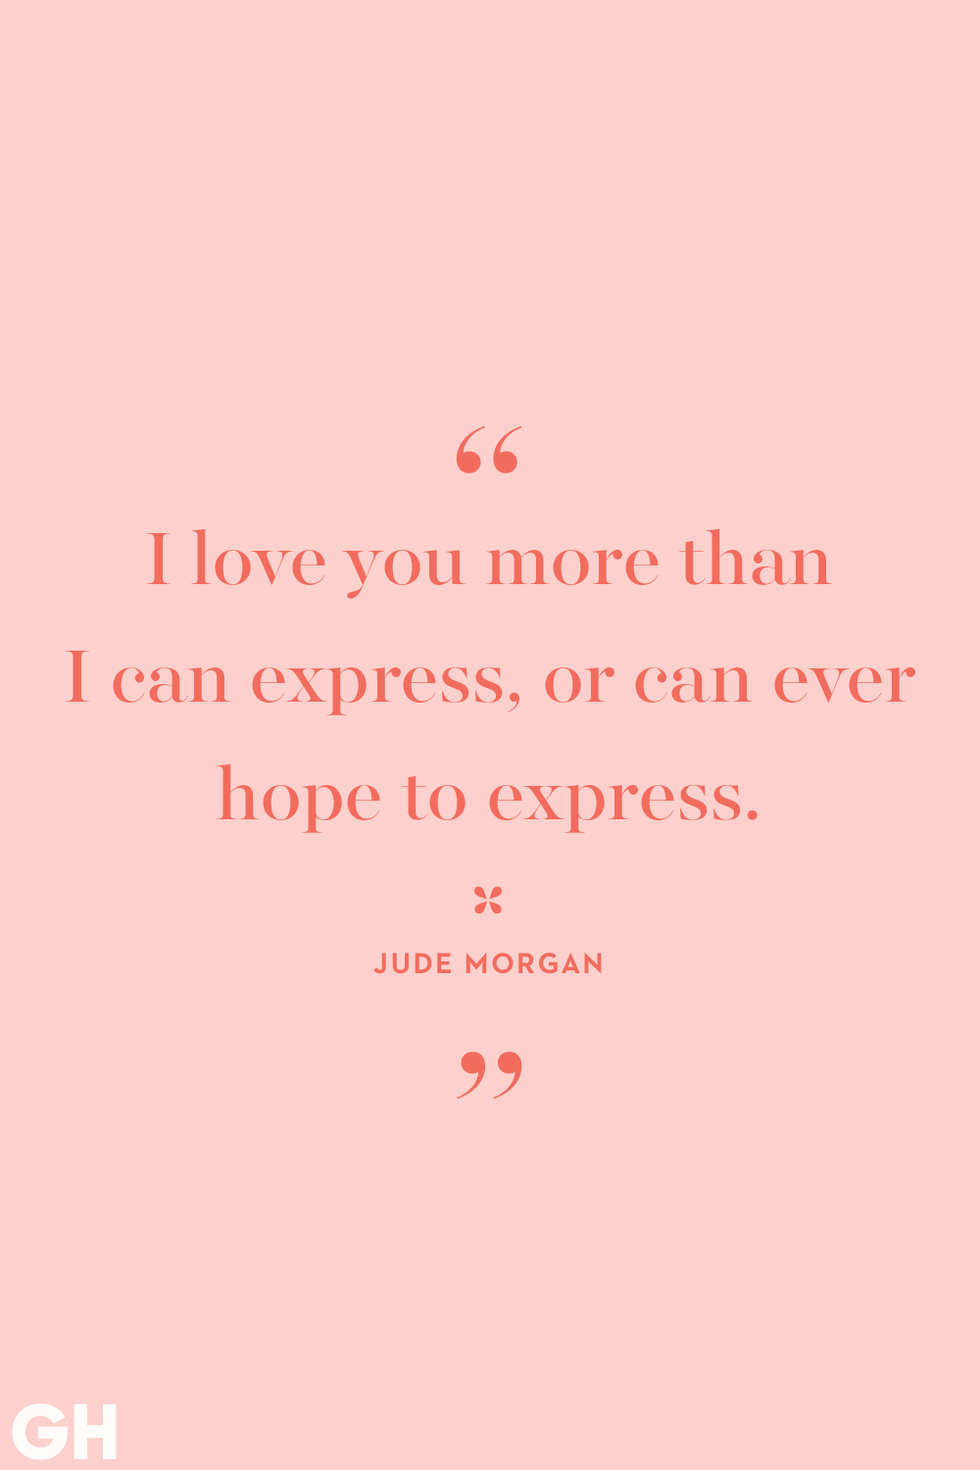 100+ Romantic Love Quotes for Her & Him To Say I Love You - Parade